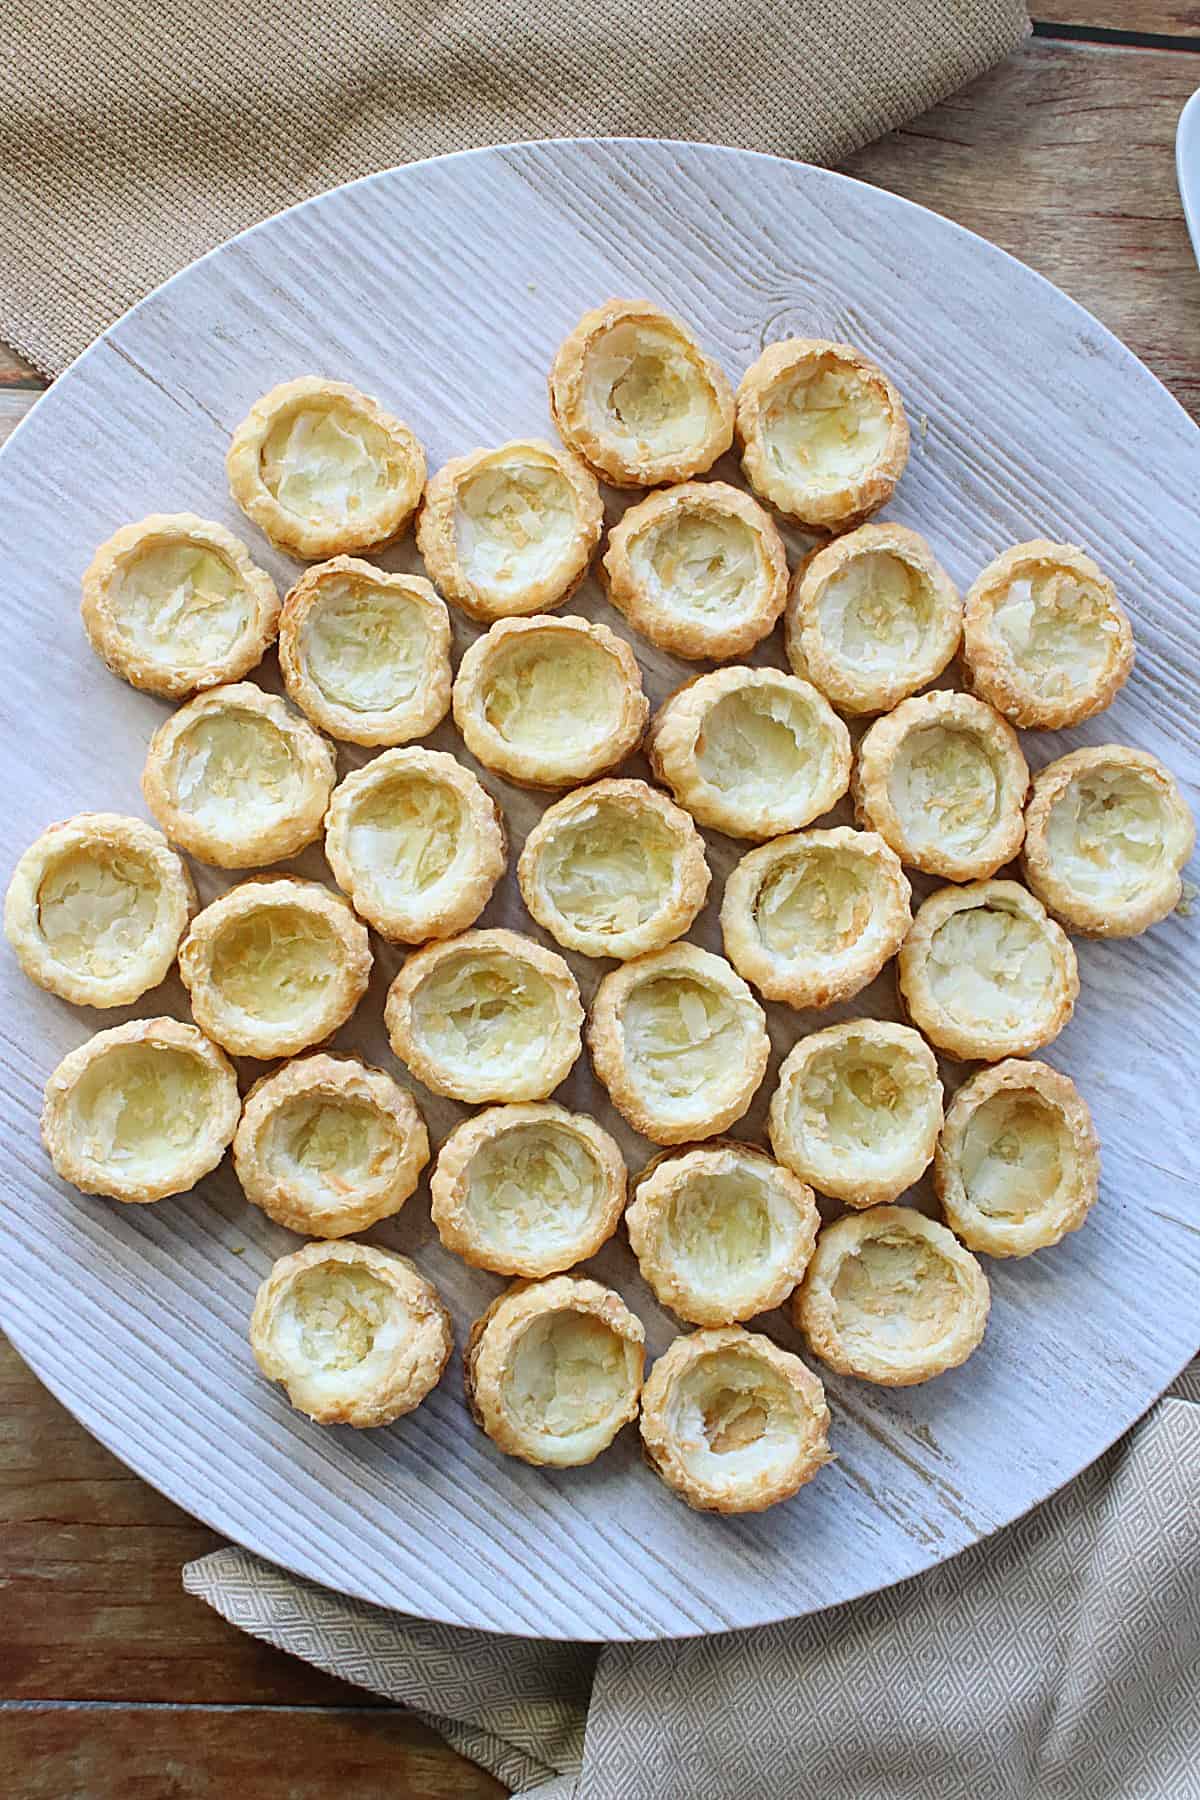 A round platter filled with baked round Puff Pastry Appetizer Cups waiting to be filled.